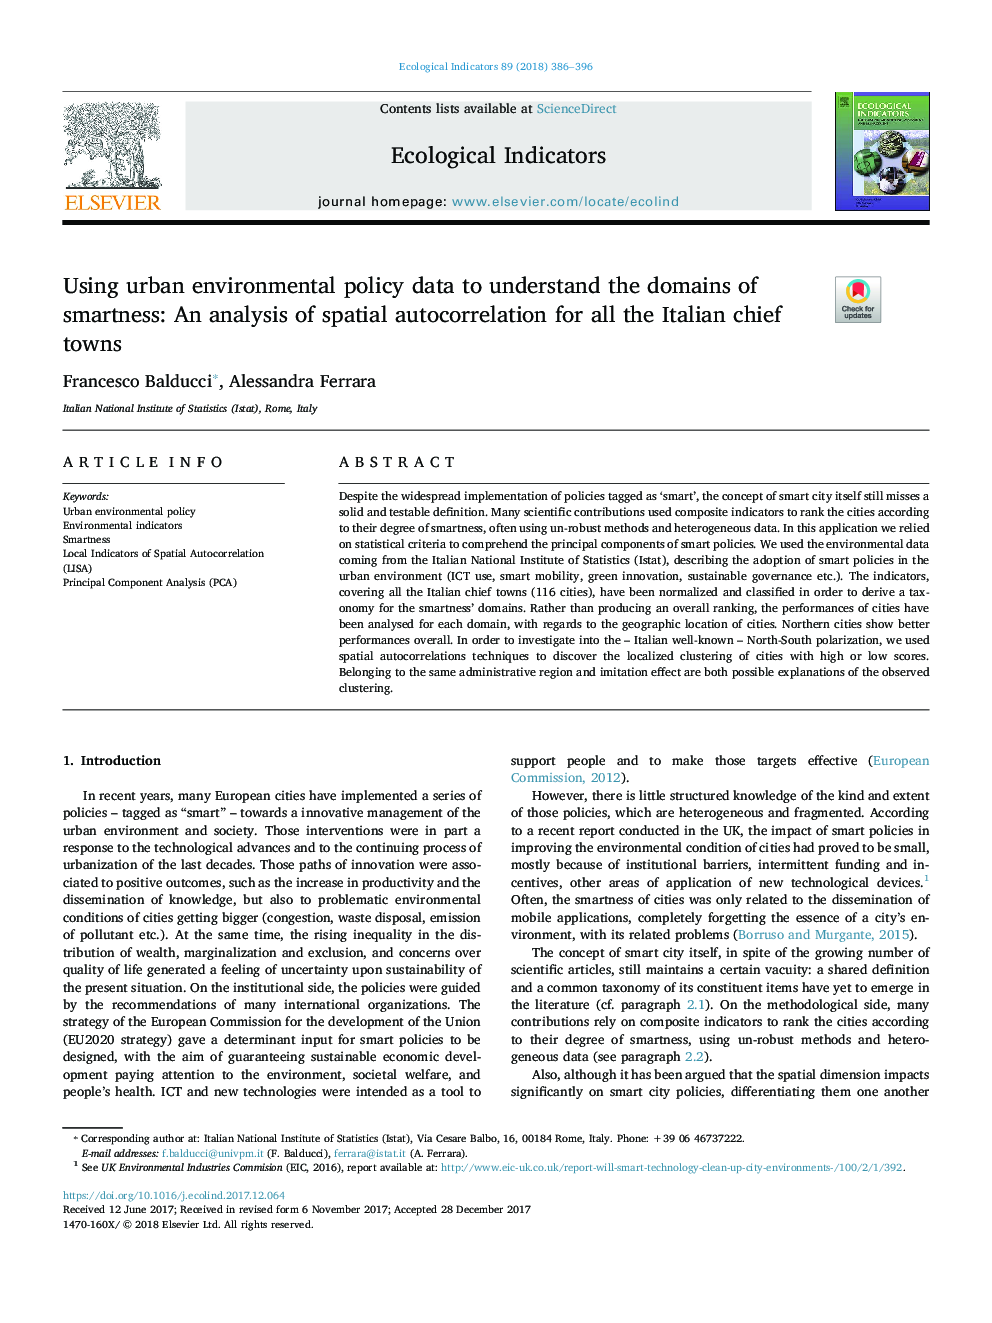 Using urban environmental policy data to understand the domains of smartness: An analysis of spatial autocorrelation for all the Italian chief towns